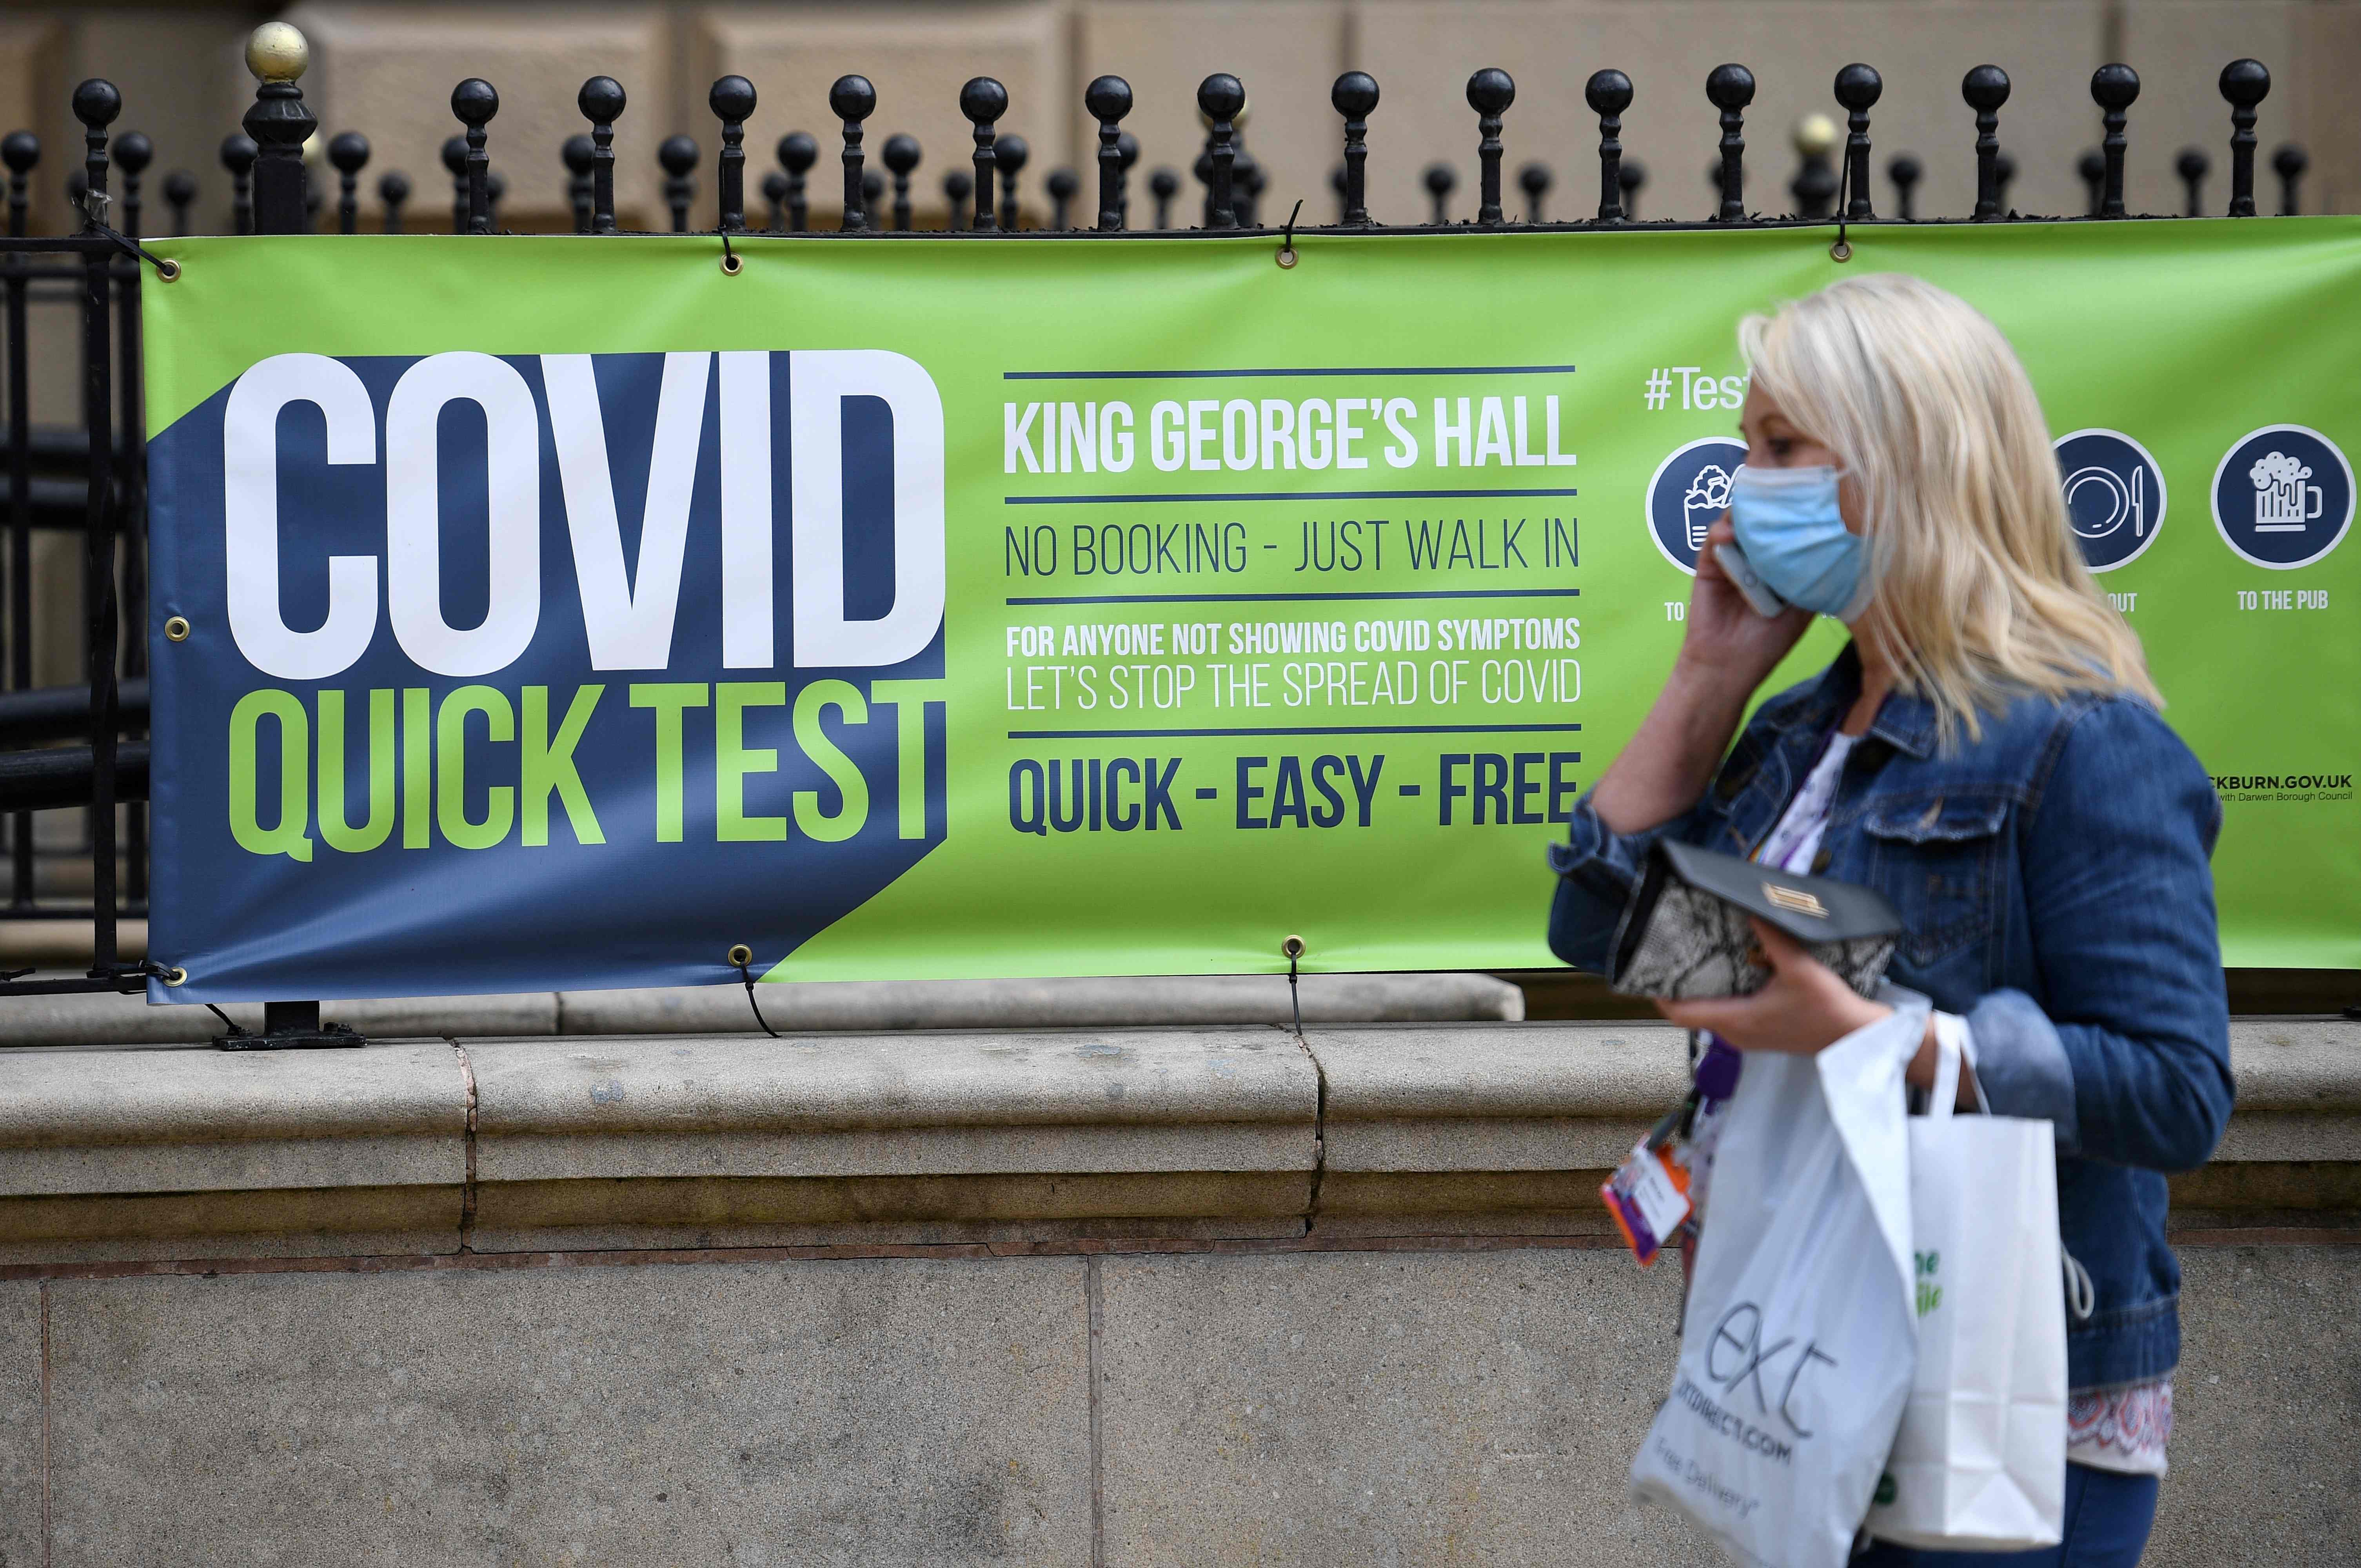 A person wearing a face covering walks past a sign for a walk-in Covid-19 testing centre in Blackburn on Wednesday